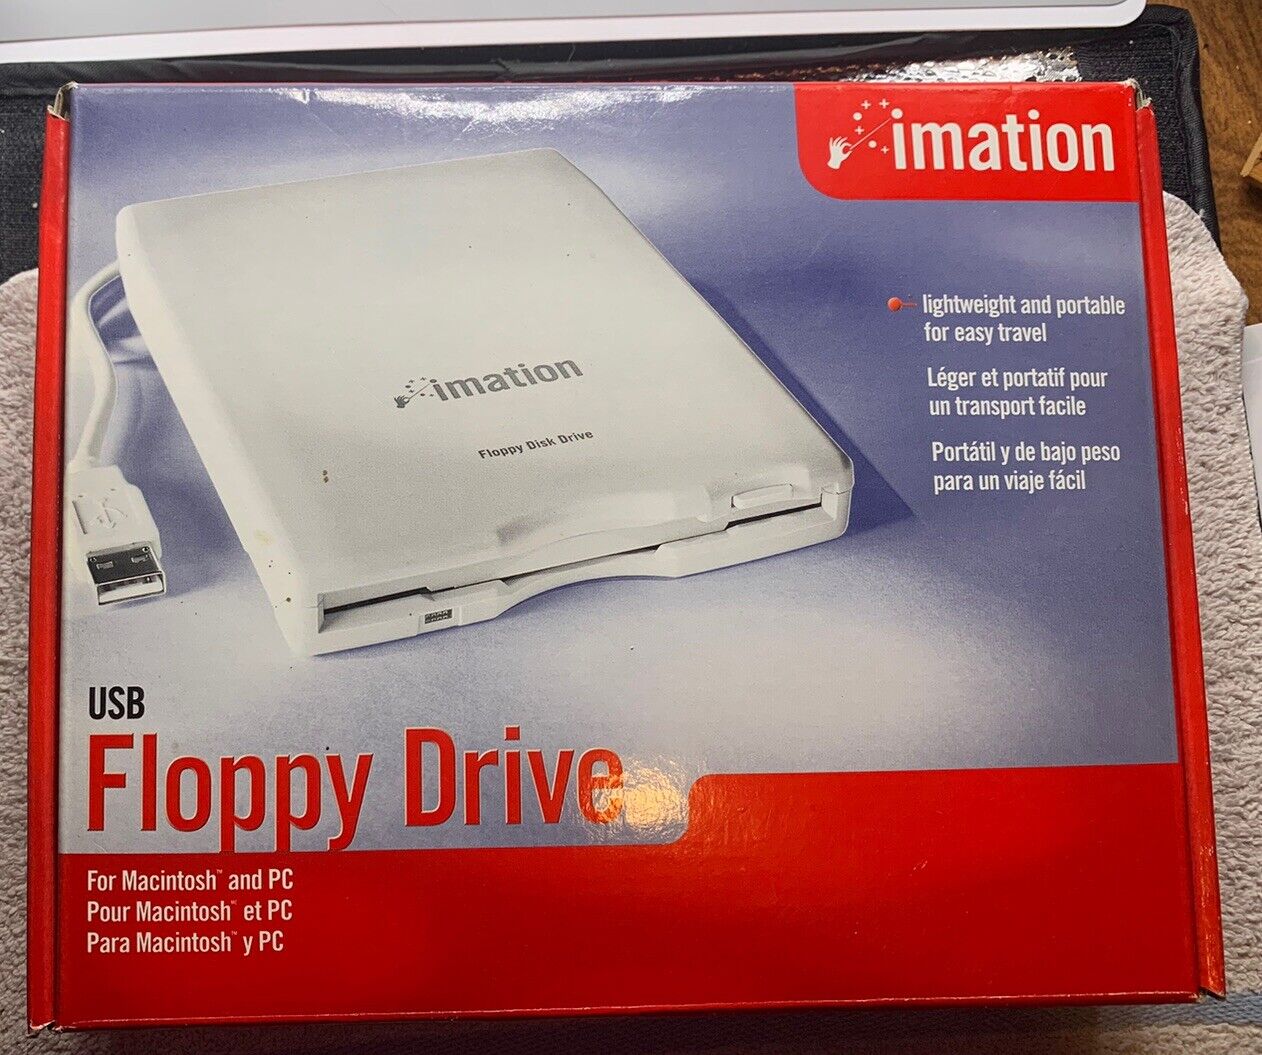 Imation USB Floppy Drive Model D353FUE For Macintosh & PC Systems New In Box